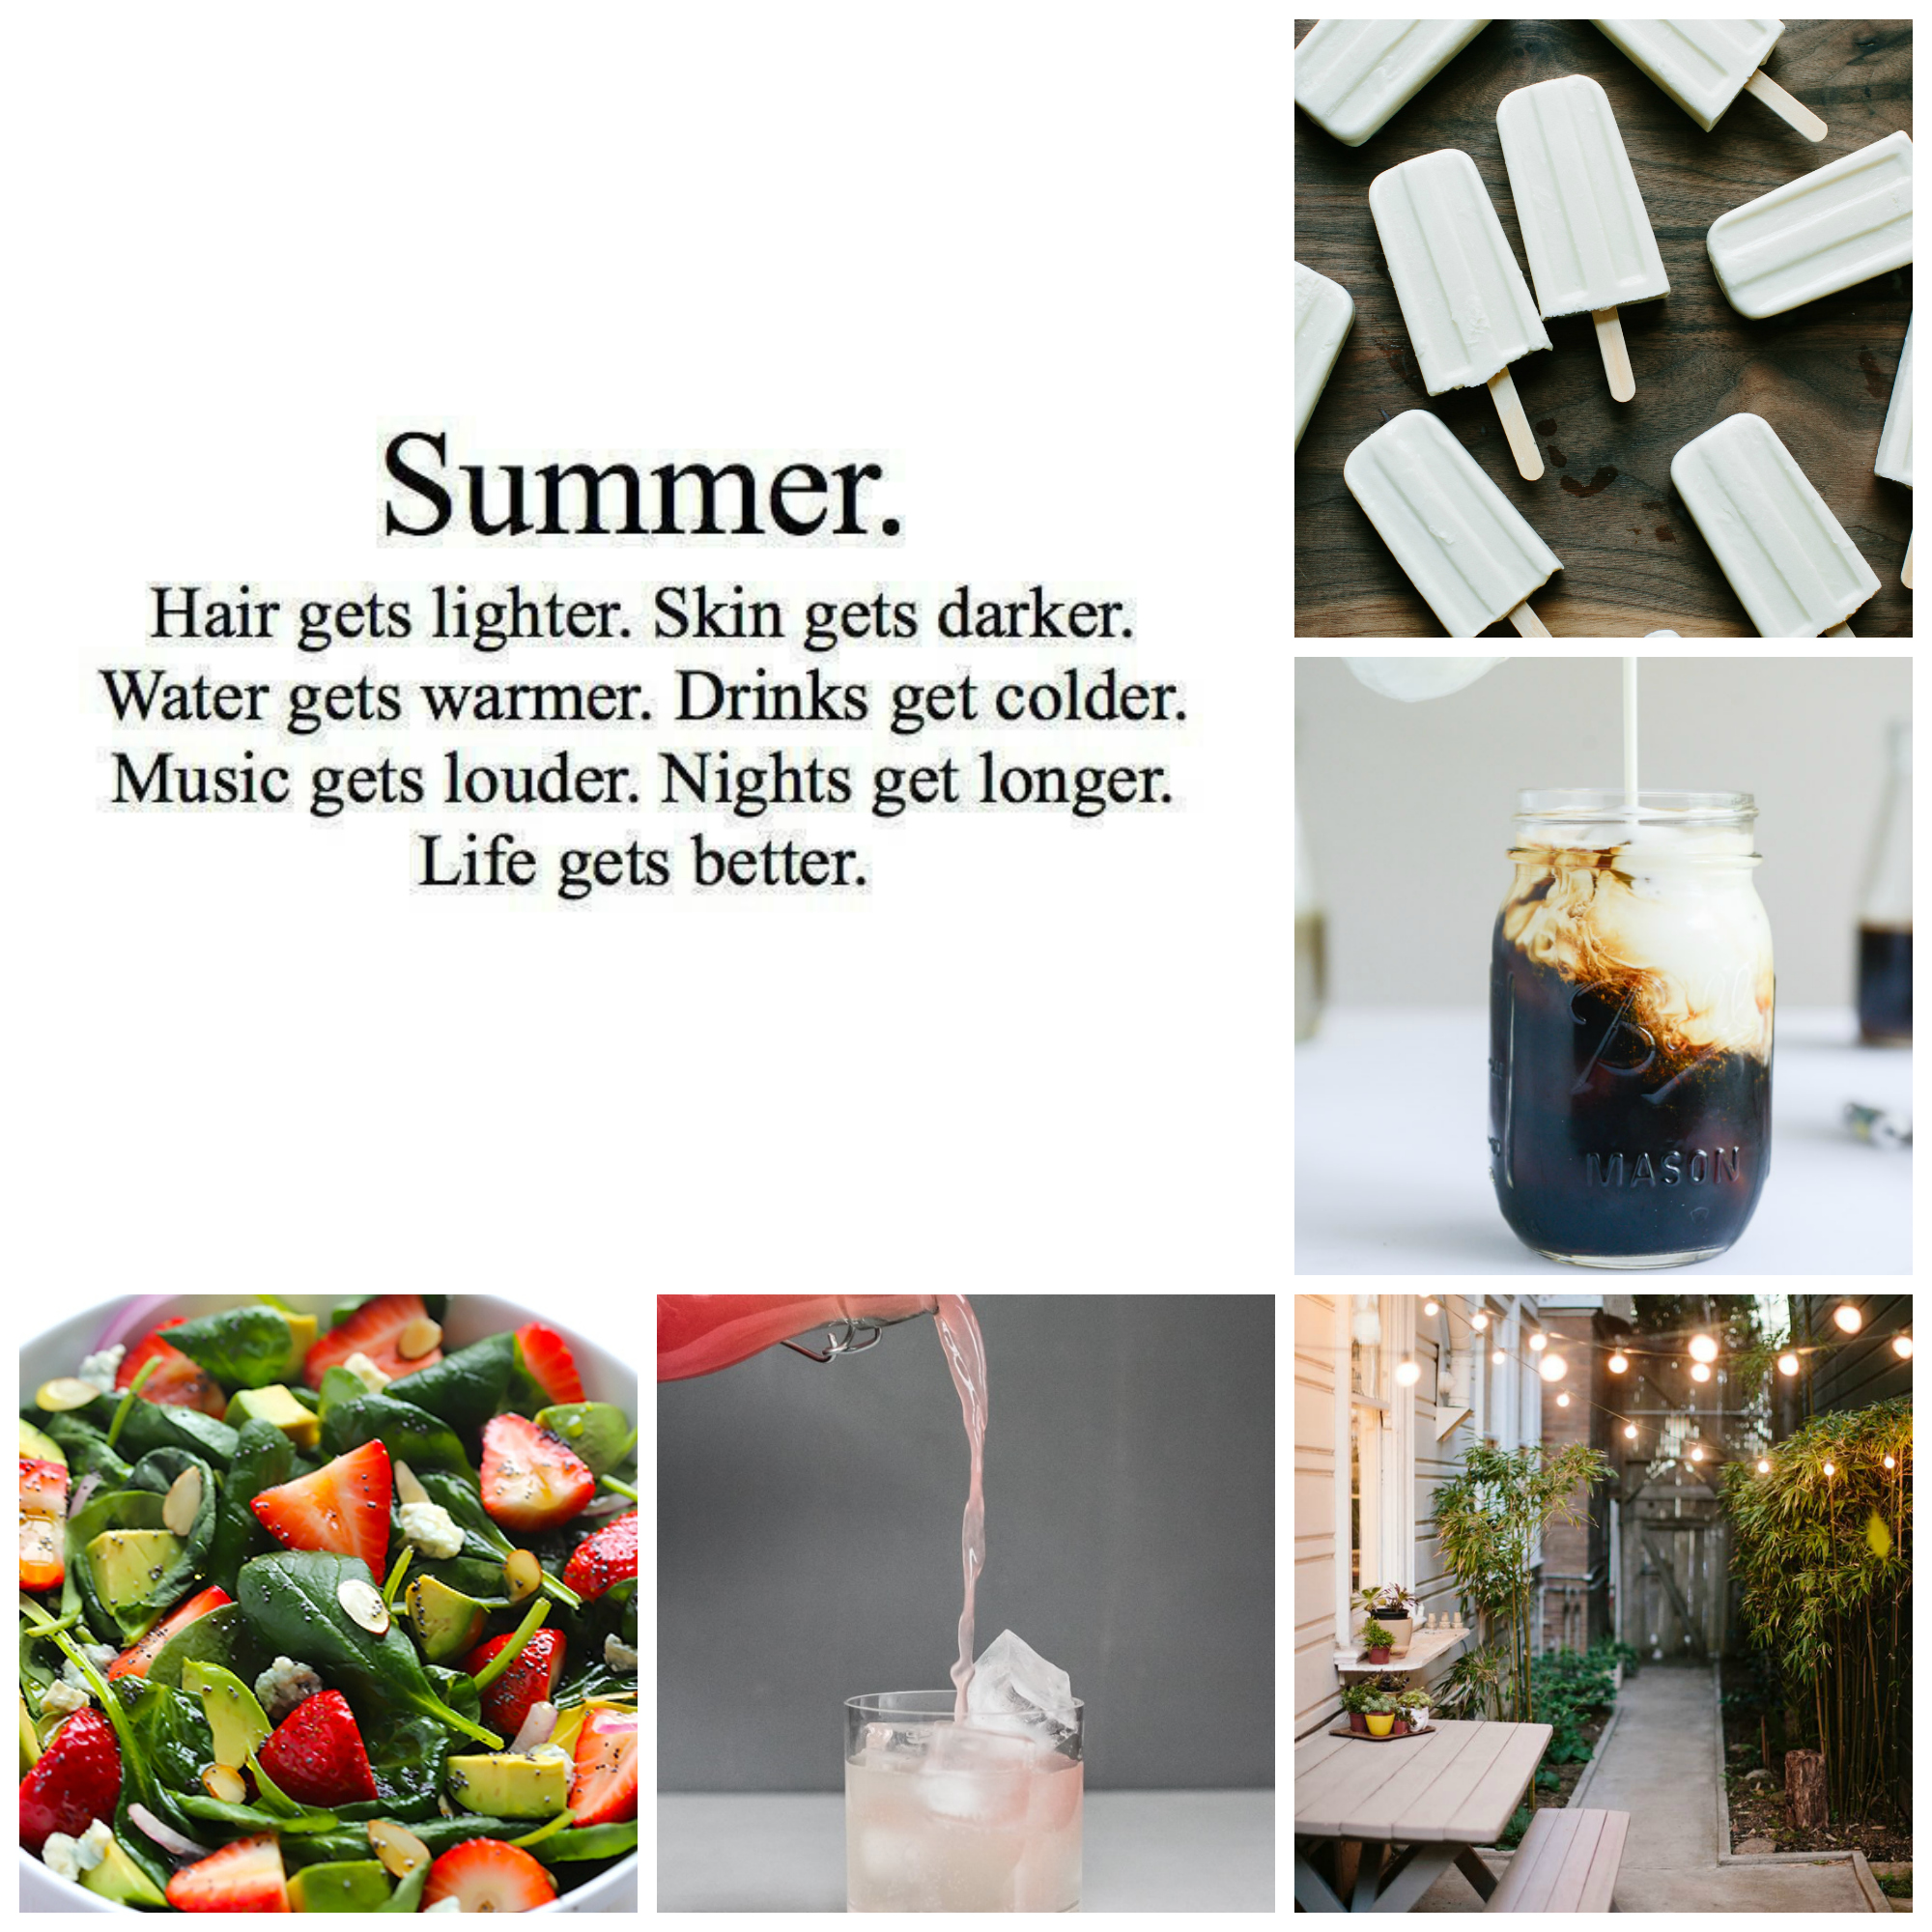 Summertime Collage